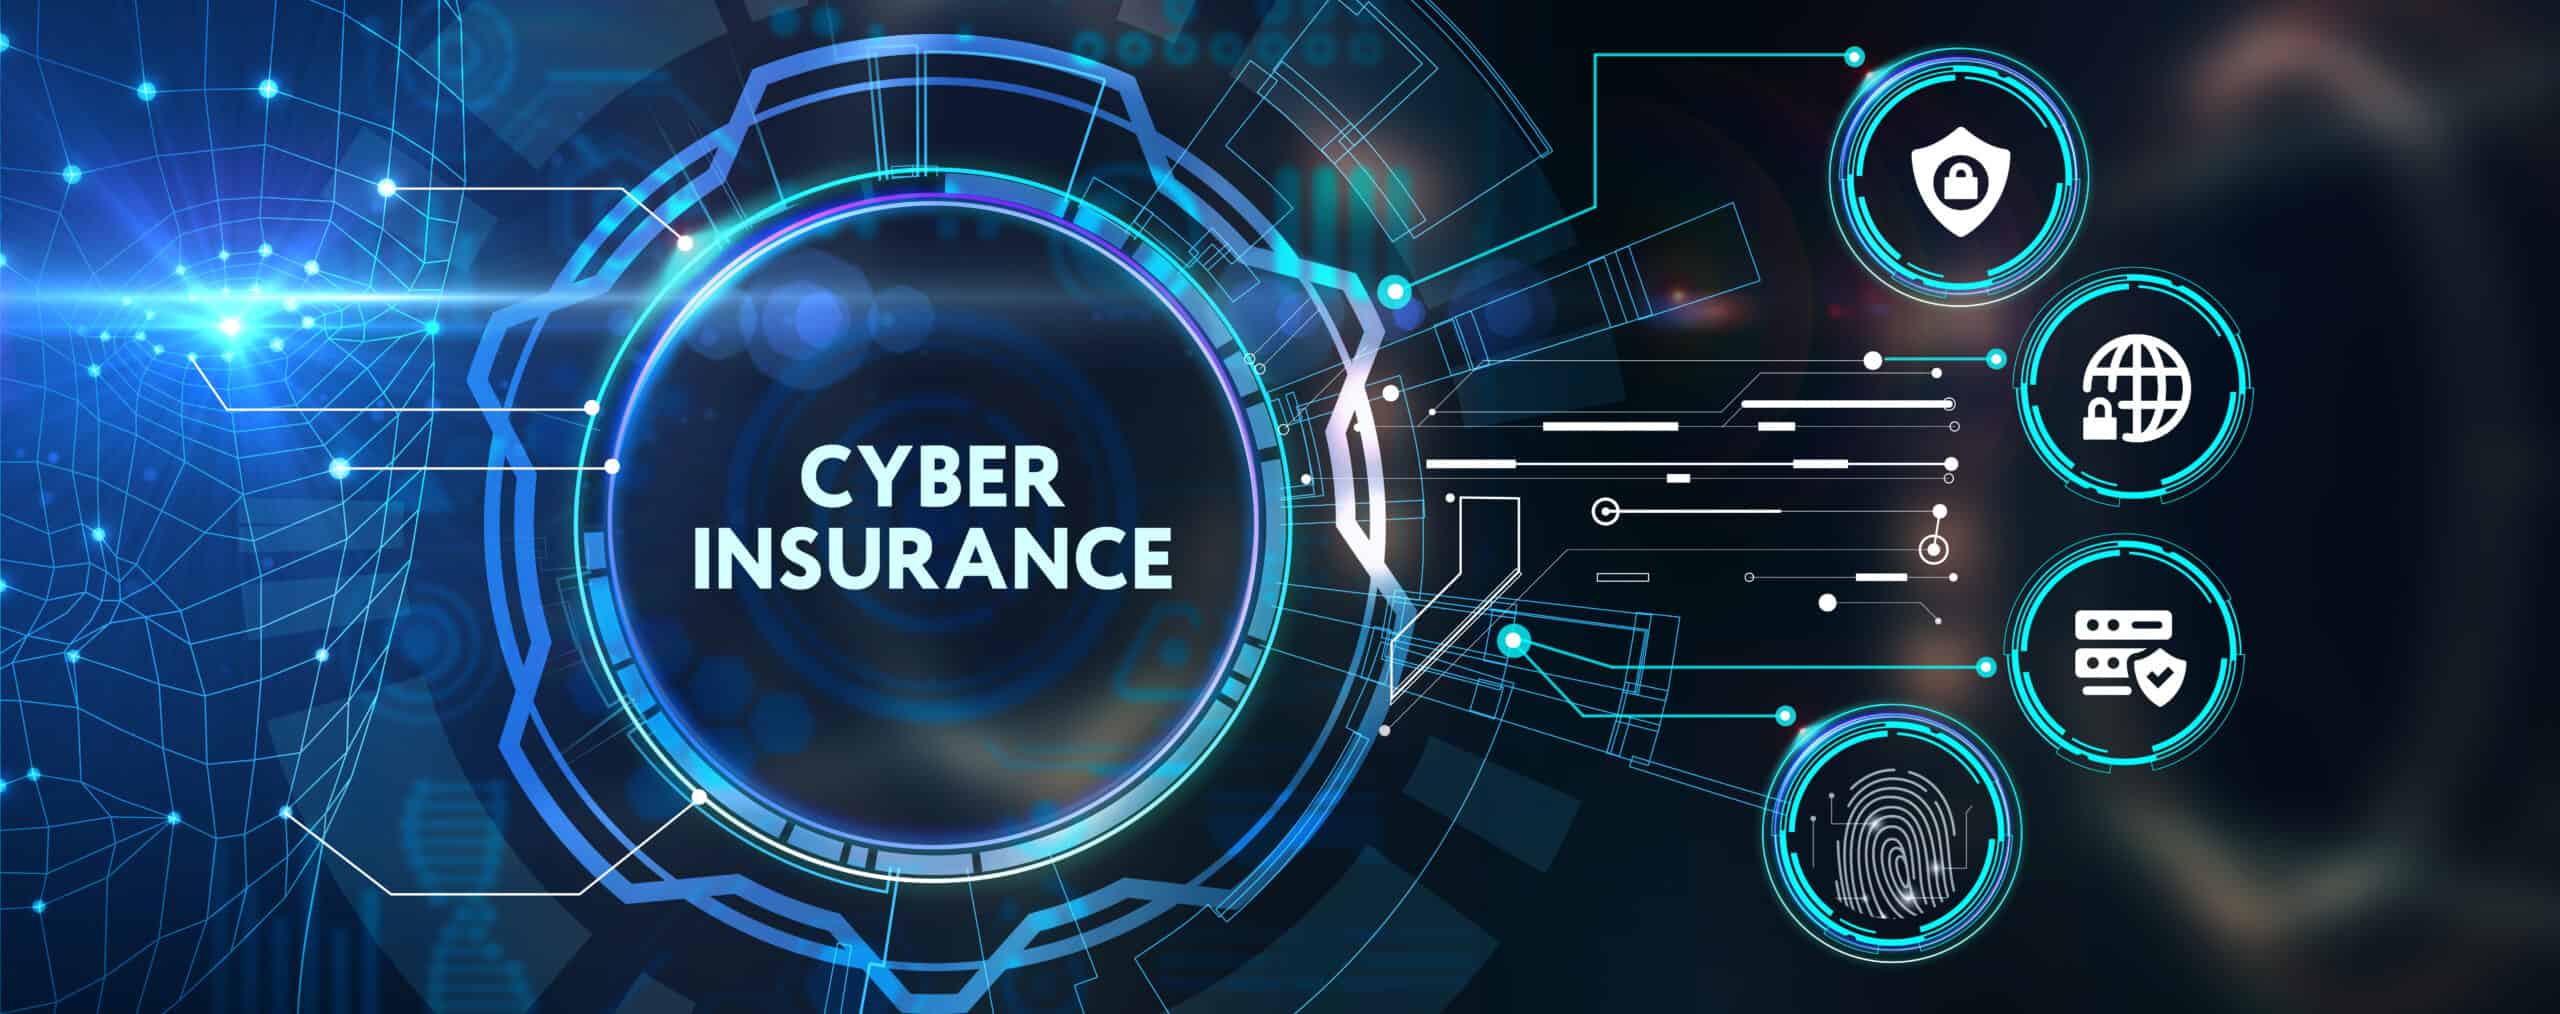 Cyber Insurance: Protecting Against Digital Threats